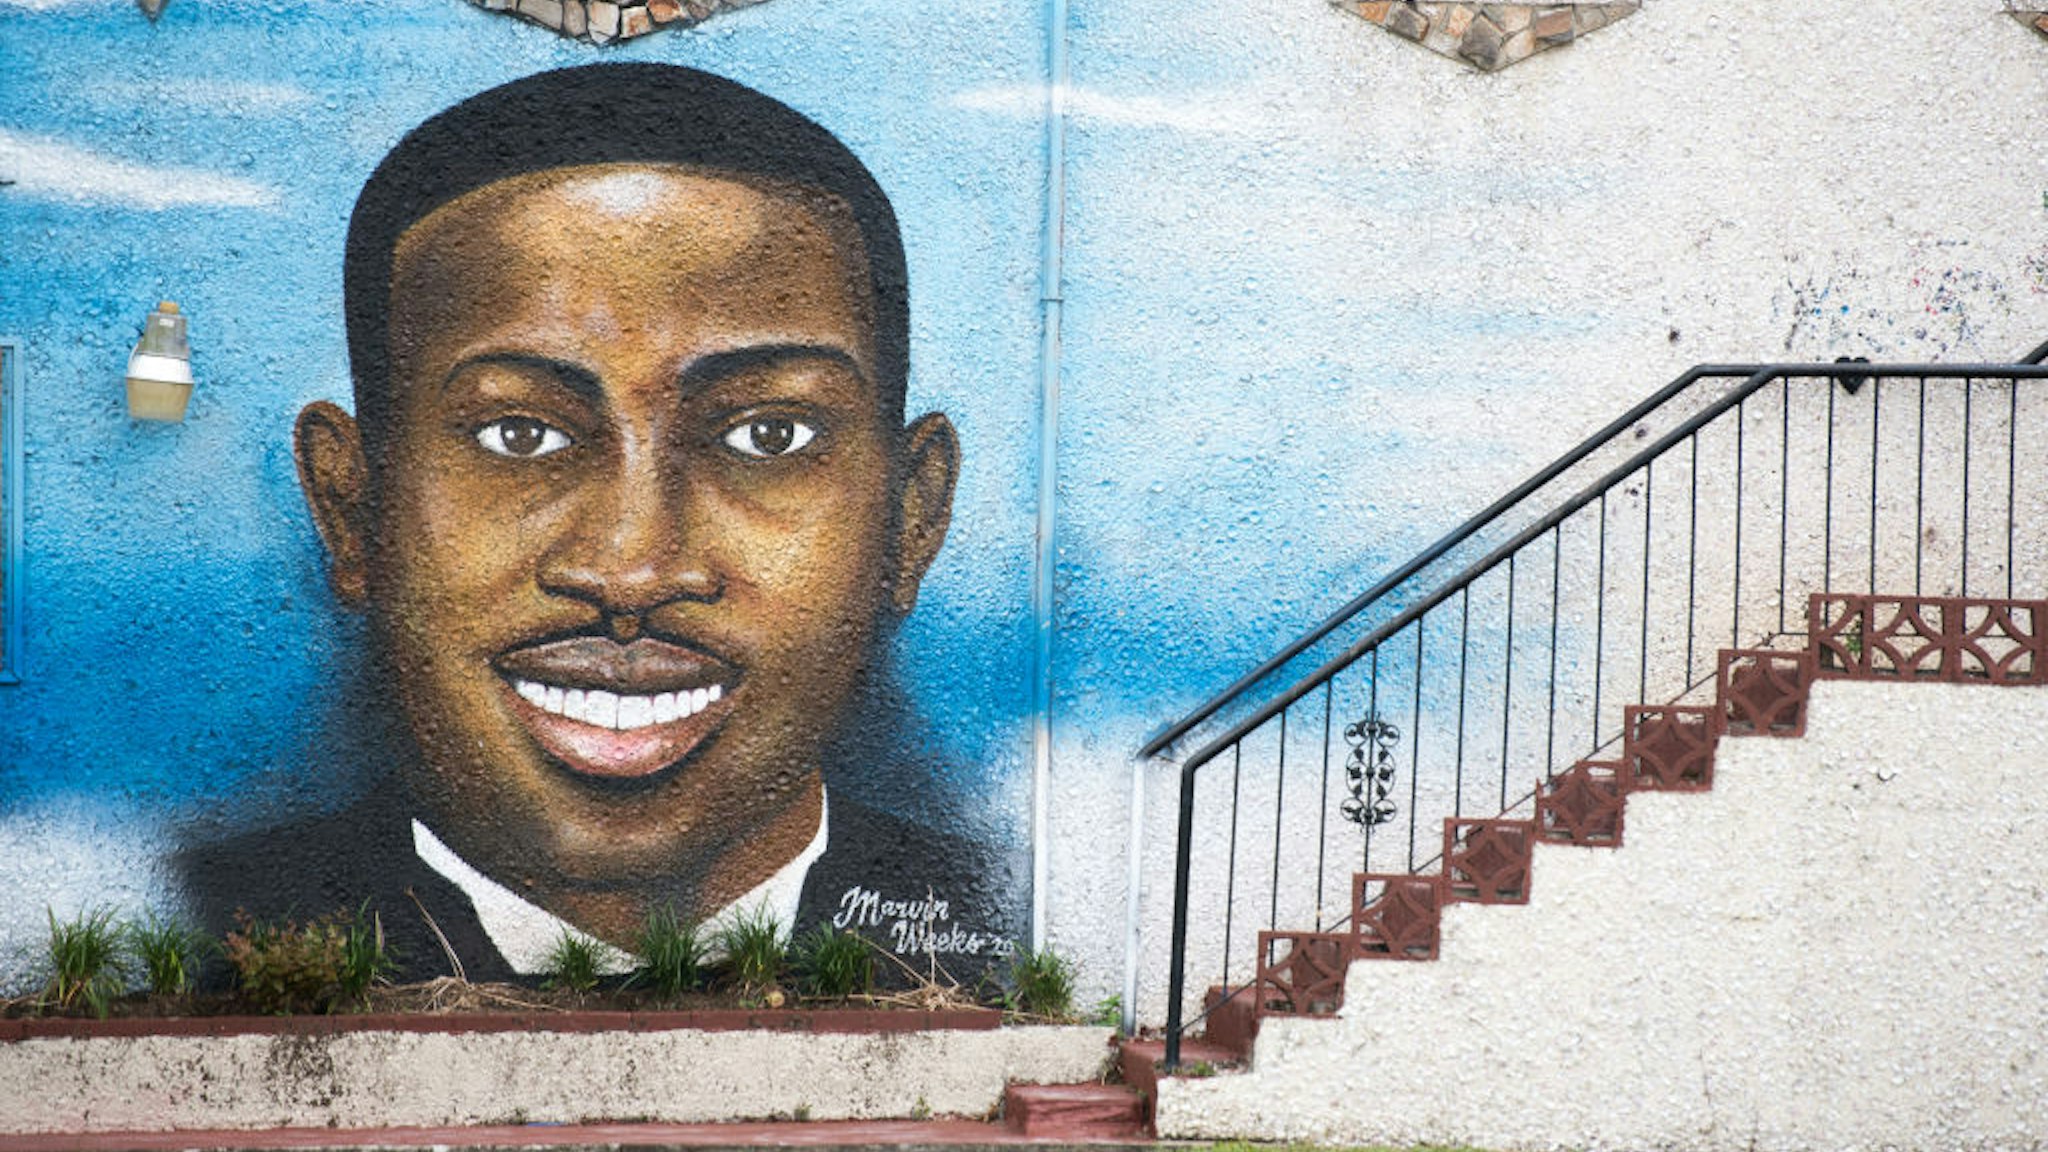 BRUNSWICK, GA - JULY 17: A mural depicting Ahmaud Arbery on July 17, 2020 in Brunswick, Georgia. Gregory McMichael, Travis McMichael, and William 'Roddie' Bryan appeared before a judge for the murder of Ahmaud Arbery. (Photo by Sean Rayford/Getty Images)